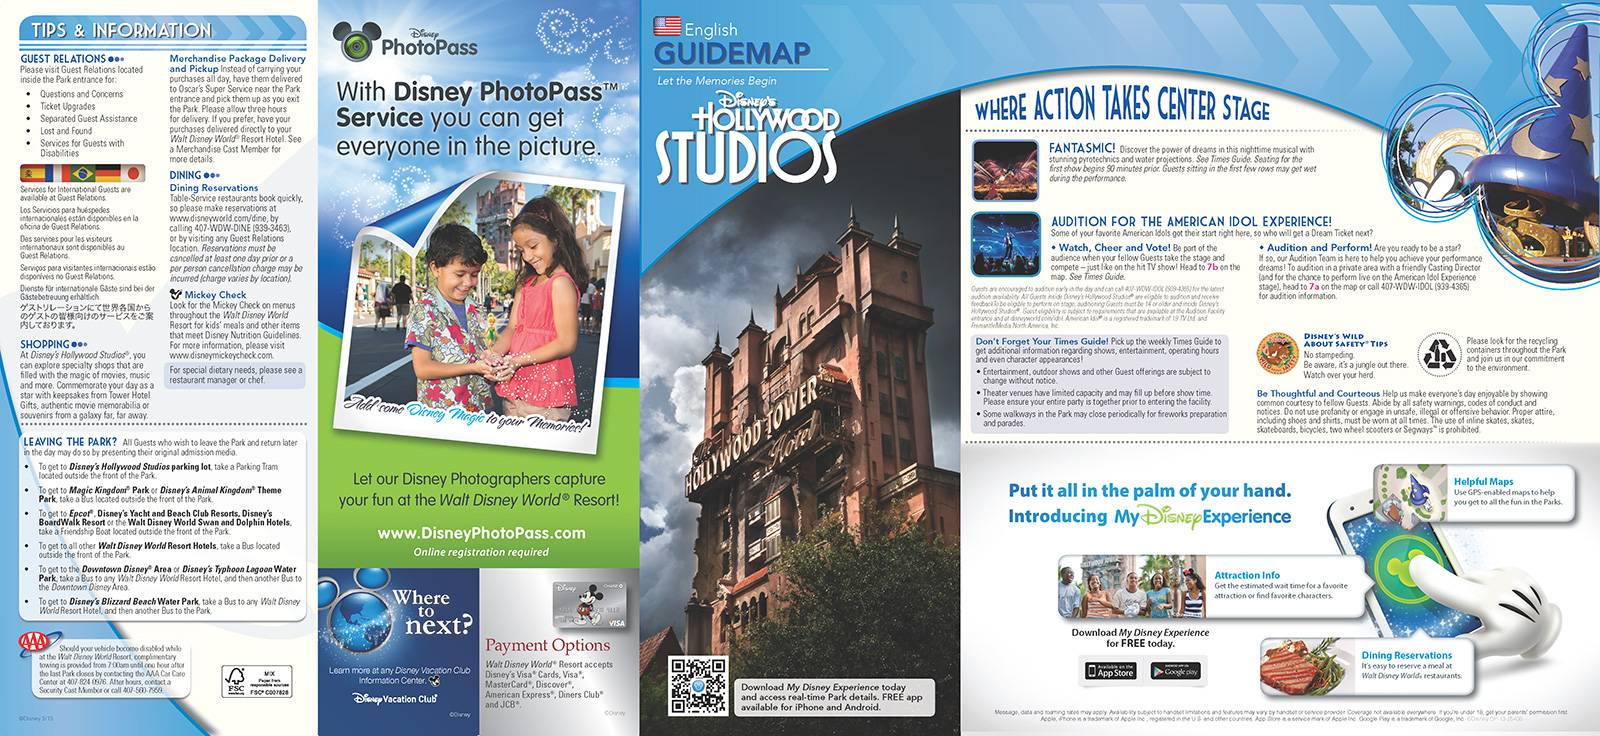 New 2013 Disney's Hollywood Studios Guidemap Page 1